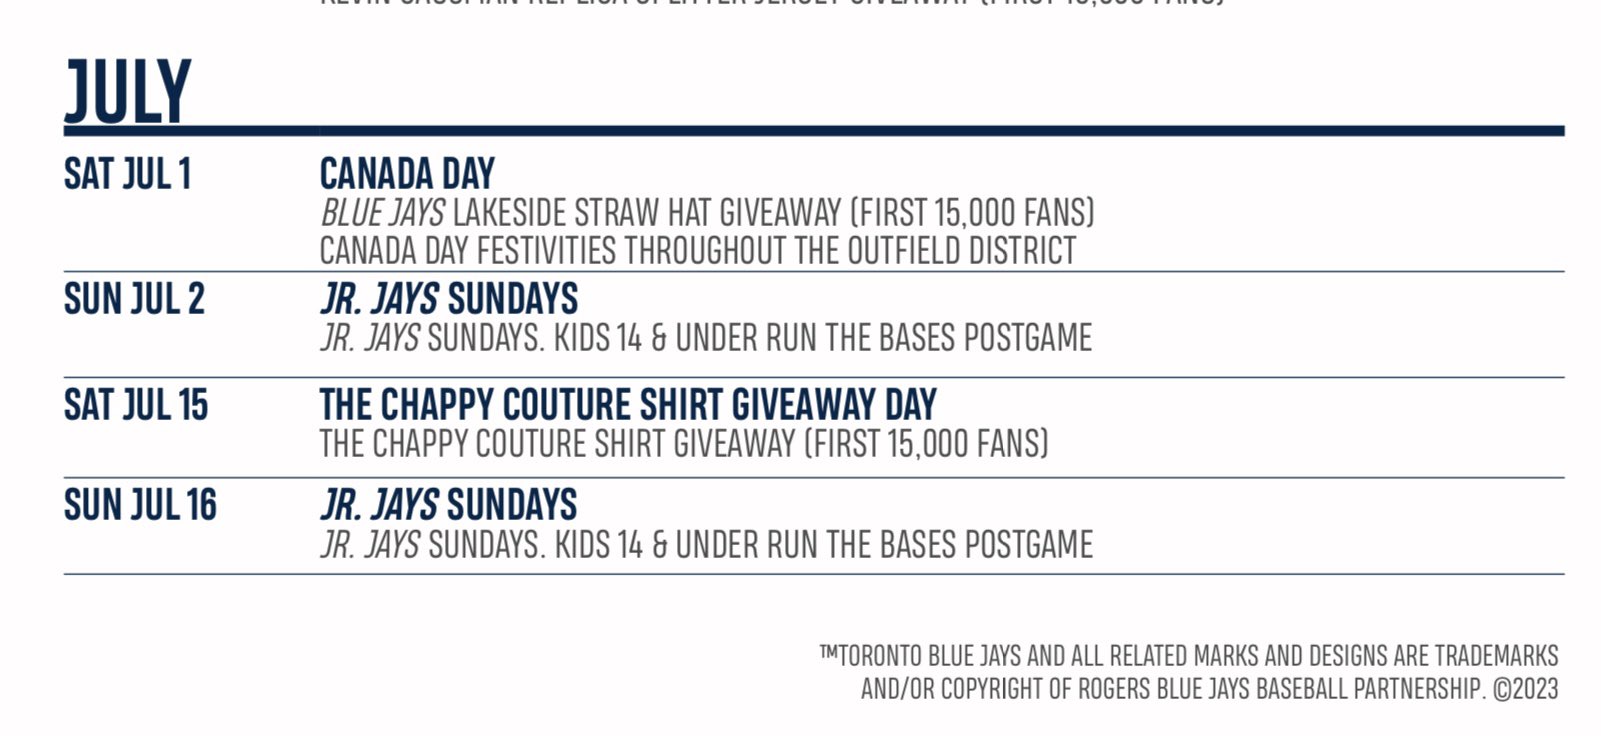 Ben Wagner on X: The #BlueJays announced their promotions & events  schedule. Featuring 50 giveaways, events, and special offer dates.   / X